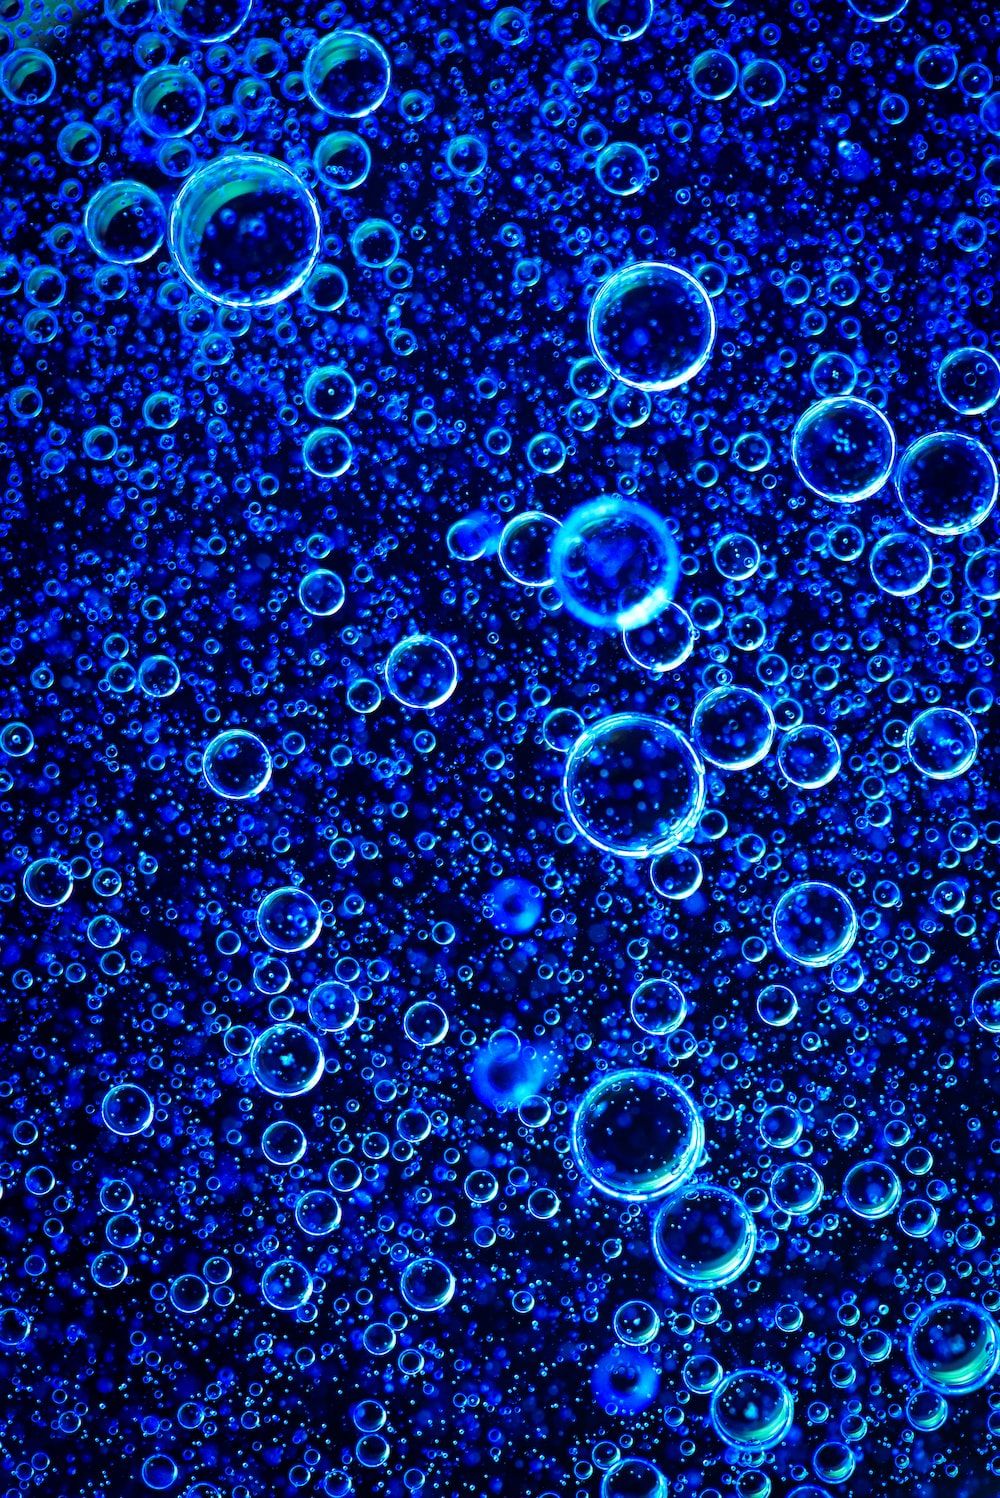 A close up of bubbles in water - Bubbles